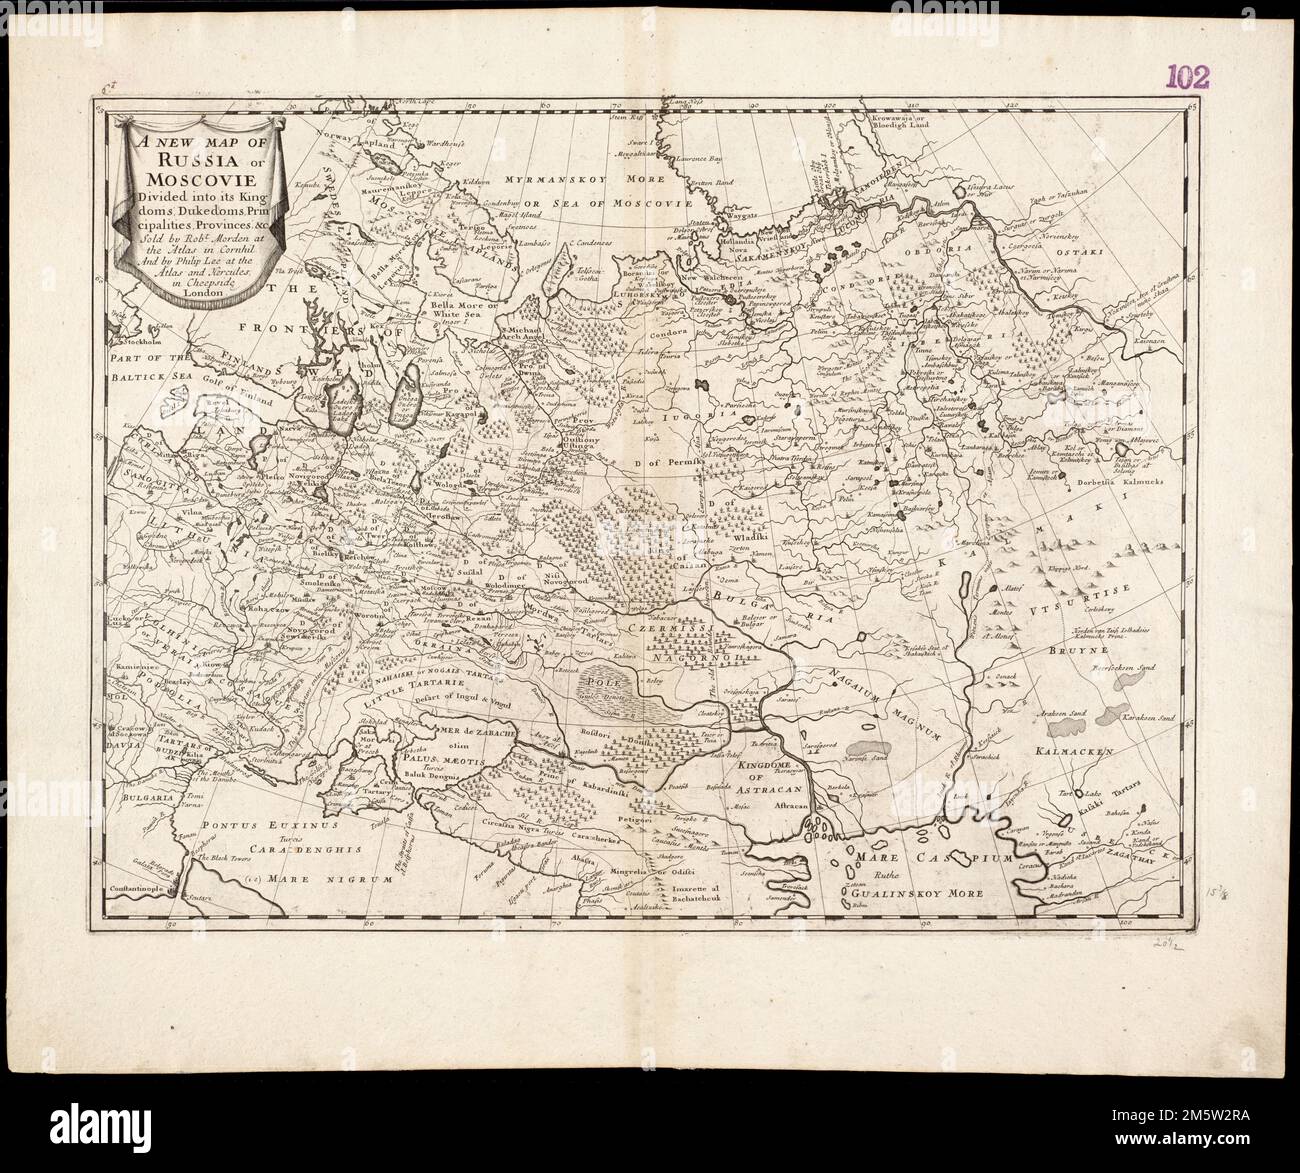 A new map of Russia or Moscovie divided into its Kingdoms, Dukedoms, Principalities, Provinces, &c. Relief shown pictorially. Cataloging, conservation, and digitization made possible in part by The National Endowment for the Humanities: Exploring the human endeavor. Part of composite portfolio atlas with title 'Collection of old maps.'.. Collection of old maps. Collection of old maps, Russia Stock Photo